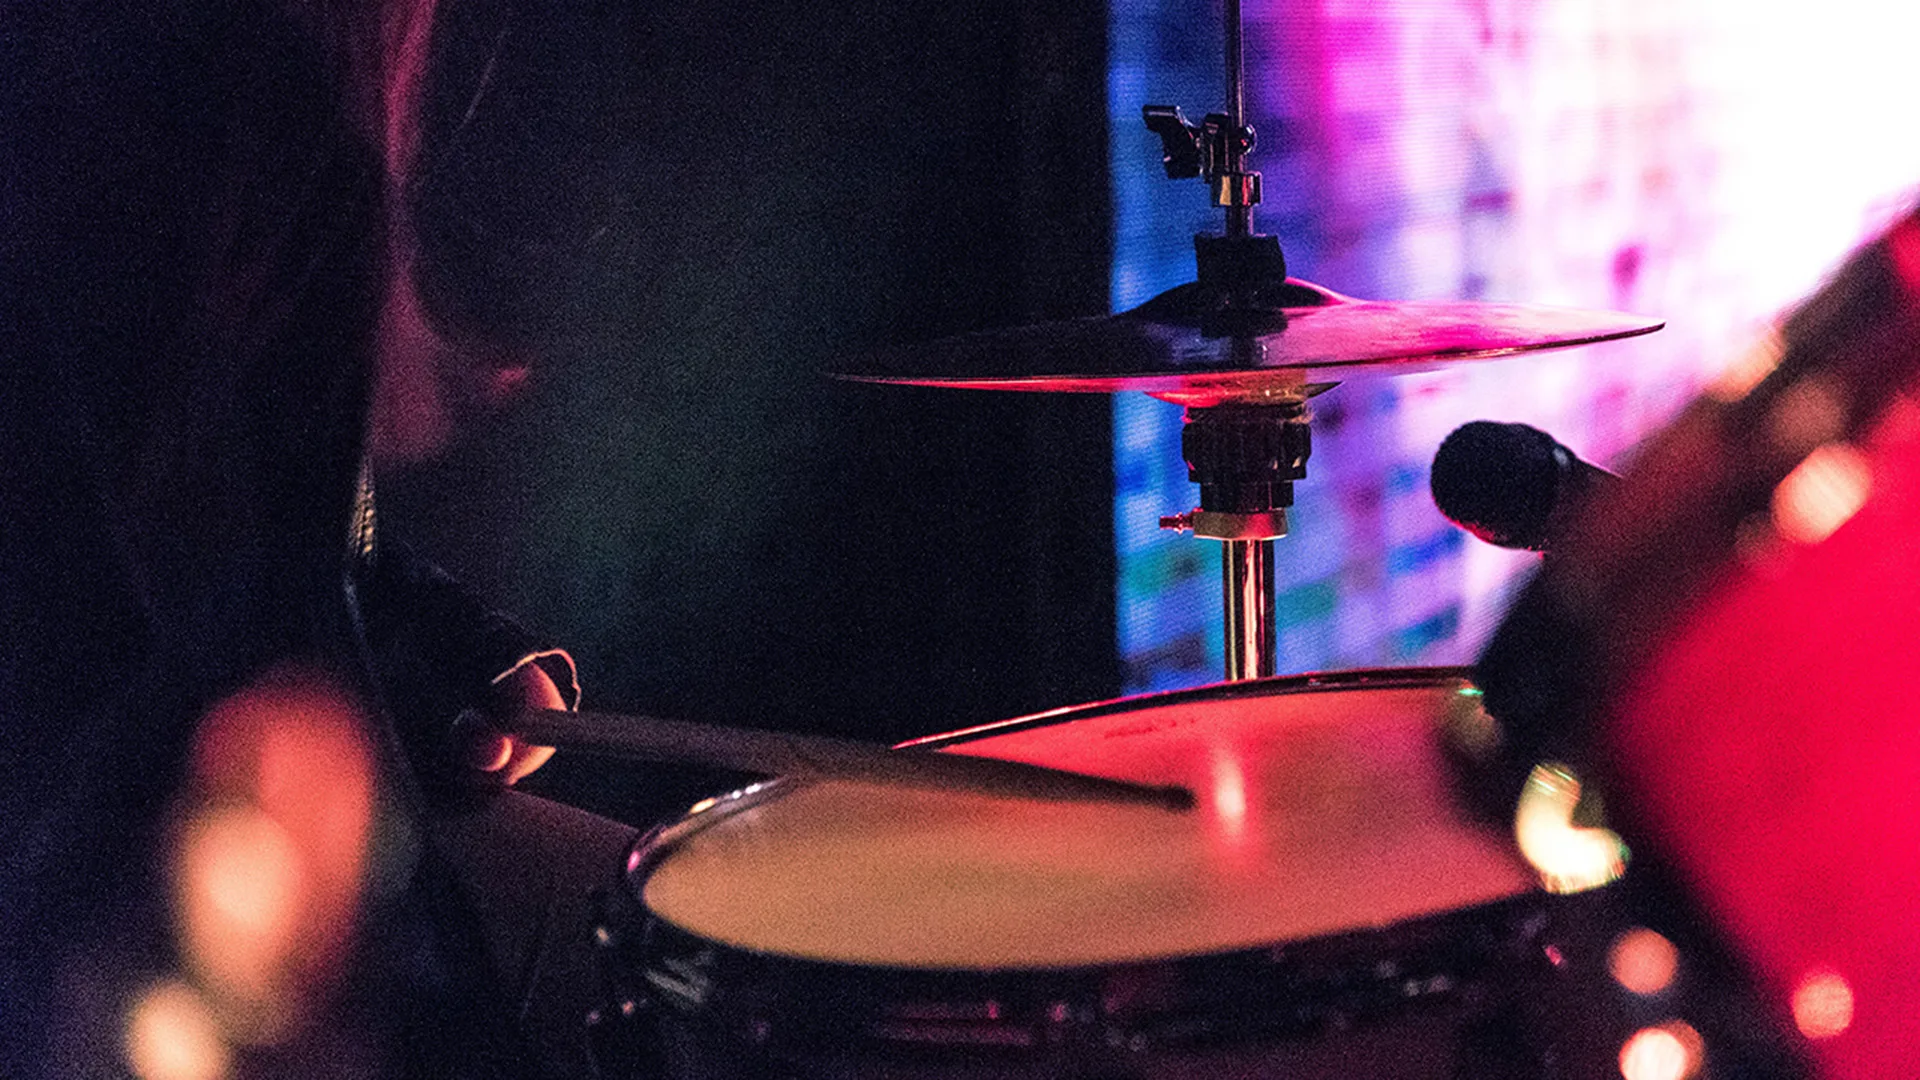 A drum kit in use